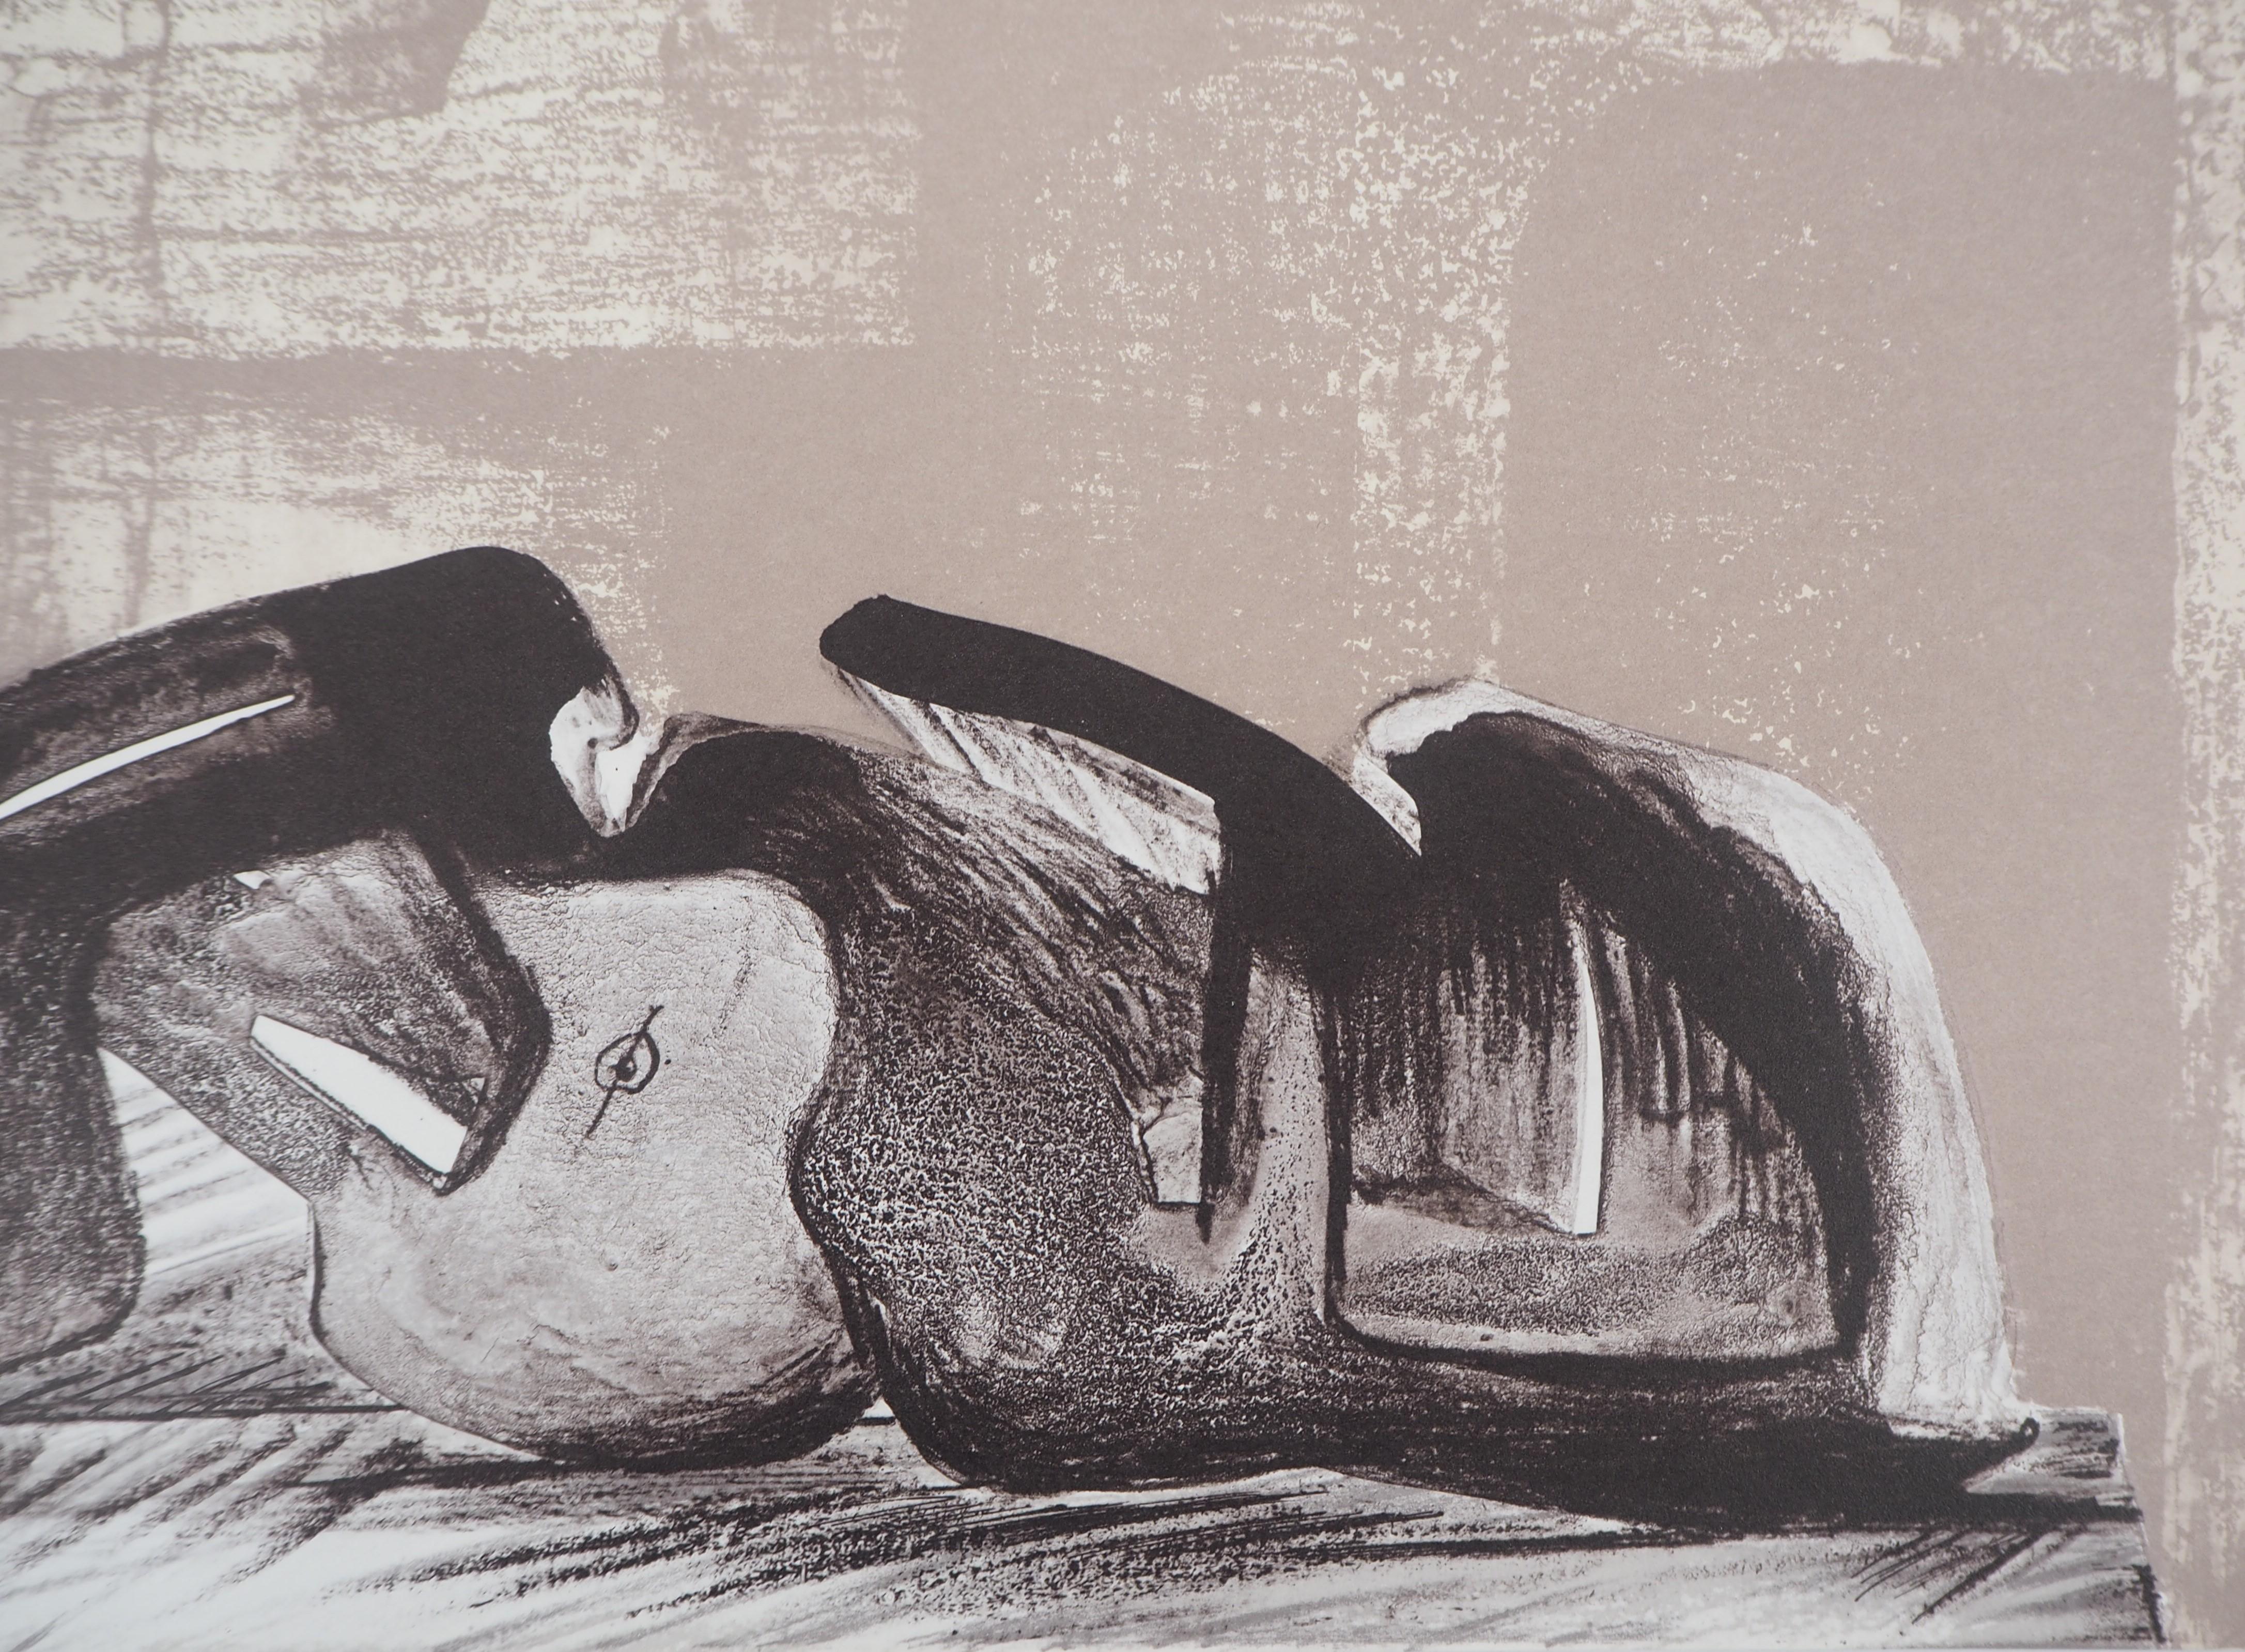 Henry MOORE
Reclining Figure, 1971

Original lithograph (Printed in Curwen Workshop).
On wove paper 31 x 24 cm (c. 12 x 10 in)
Edited by San Lazarro, 1977

Excellent condition